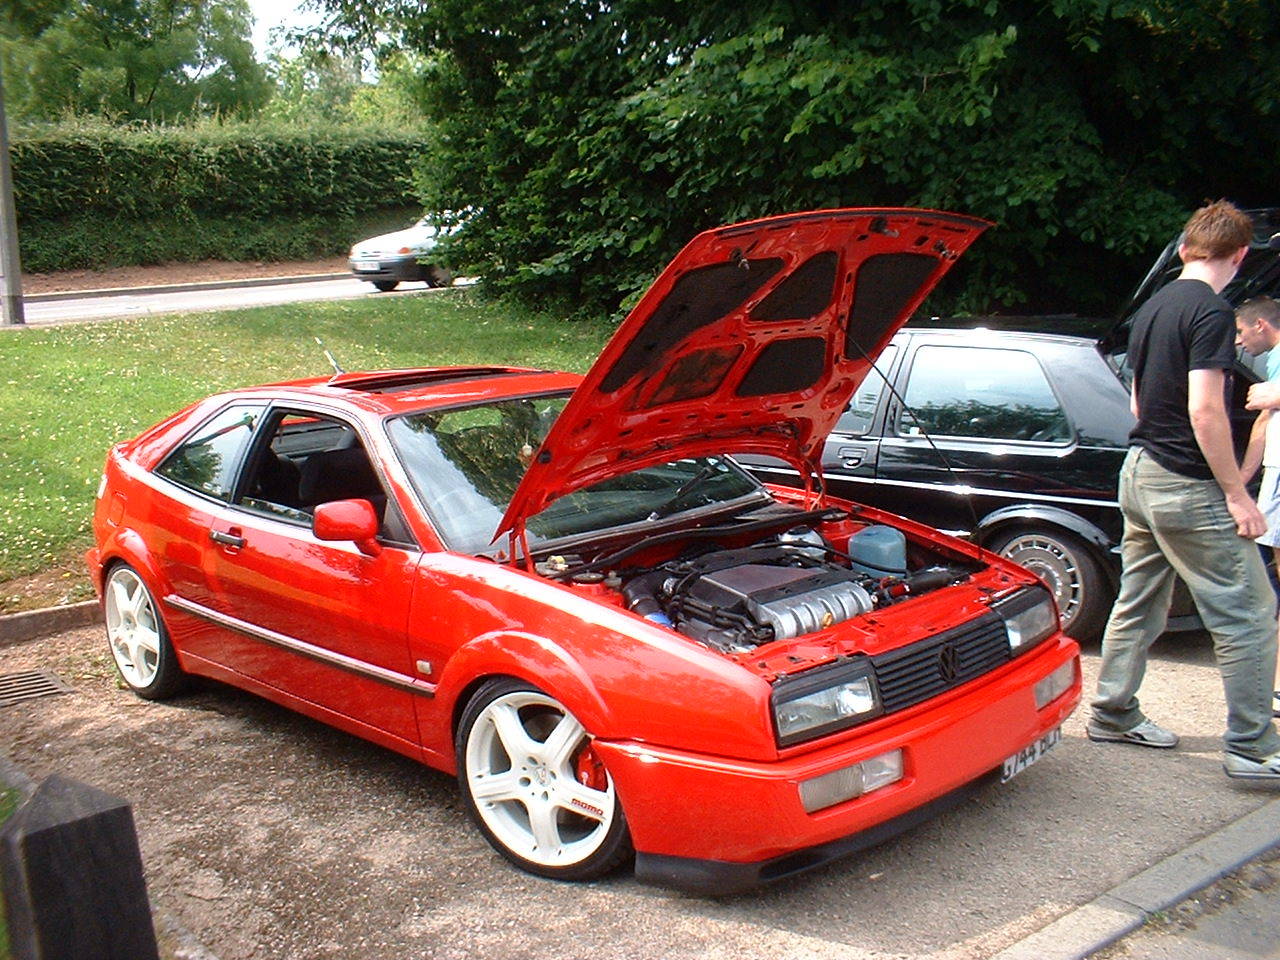 So-wal Meet June 2003. The owner of this ‘scruffydubber’ built it from a 16v. I had the pleasure of having a ride near the RAF base when minidisc players were in fashion (he had one in the car!) Sadly the car was crashed but the next Corrado he had...